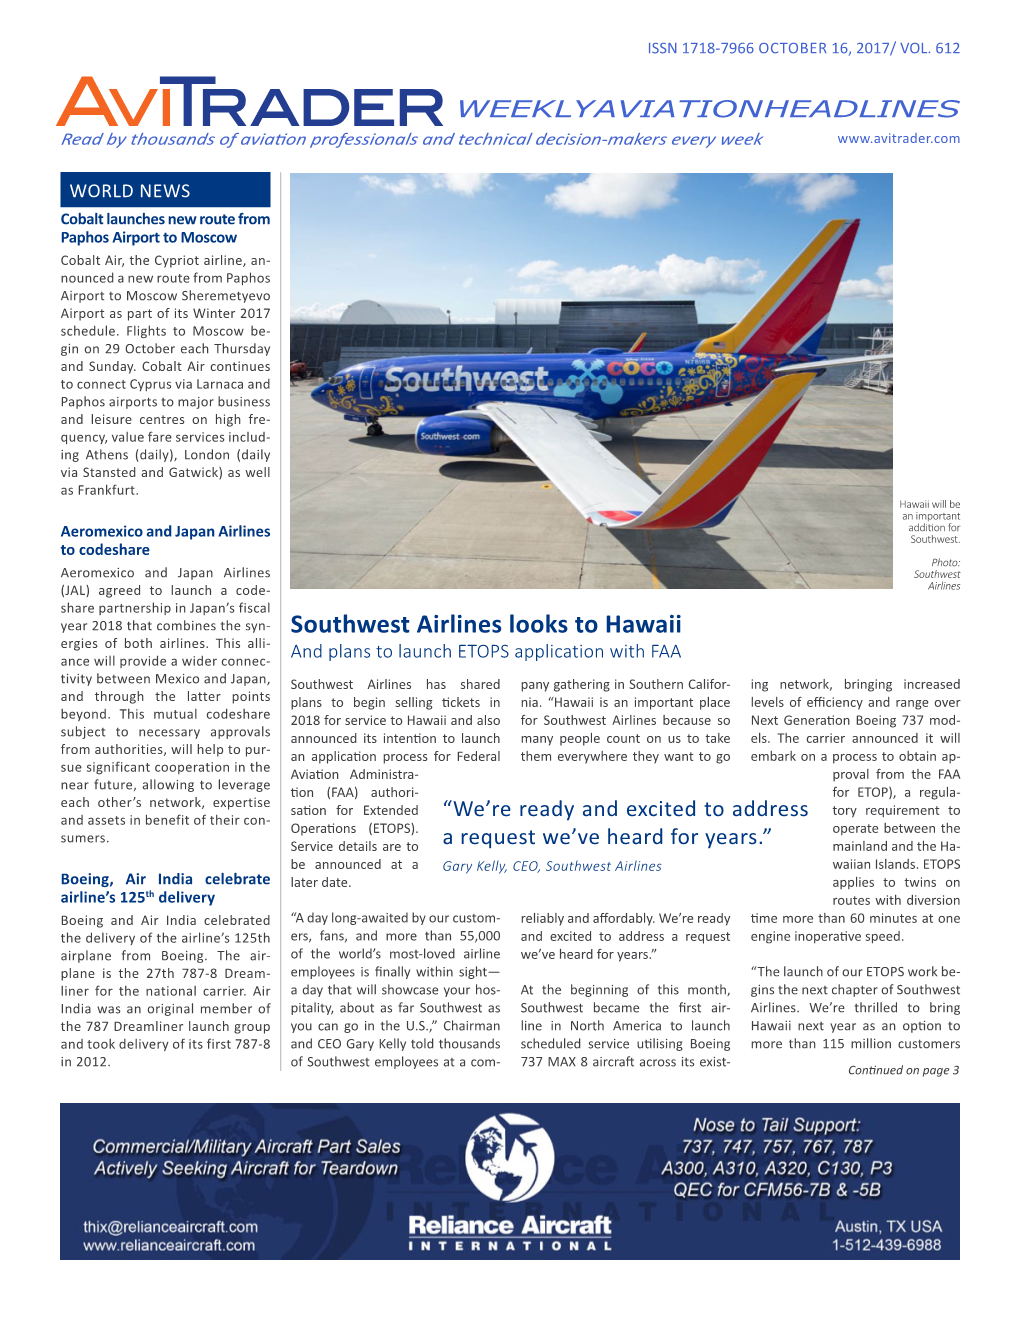 Southwest Airlines Looks to Hawaii Ergies of Both Airlines